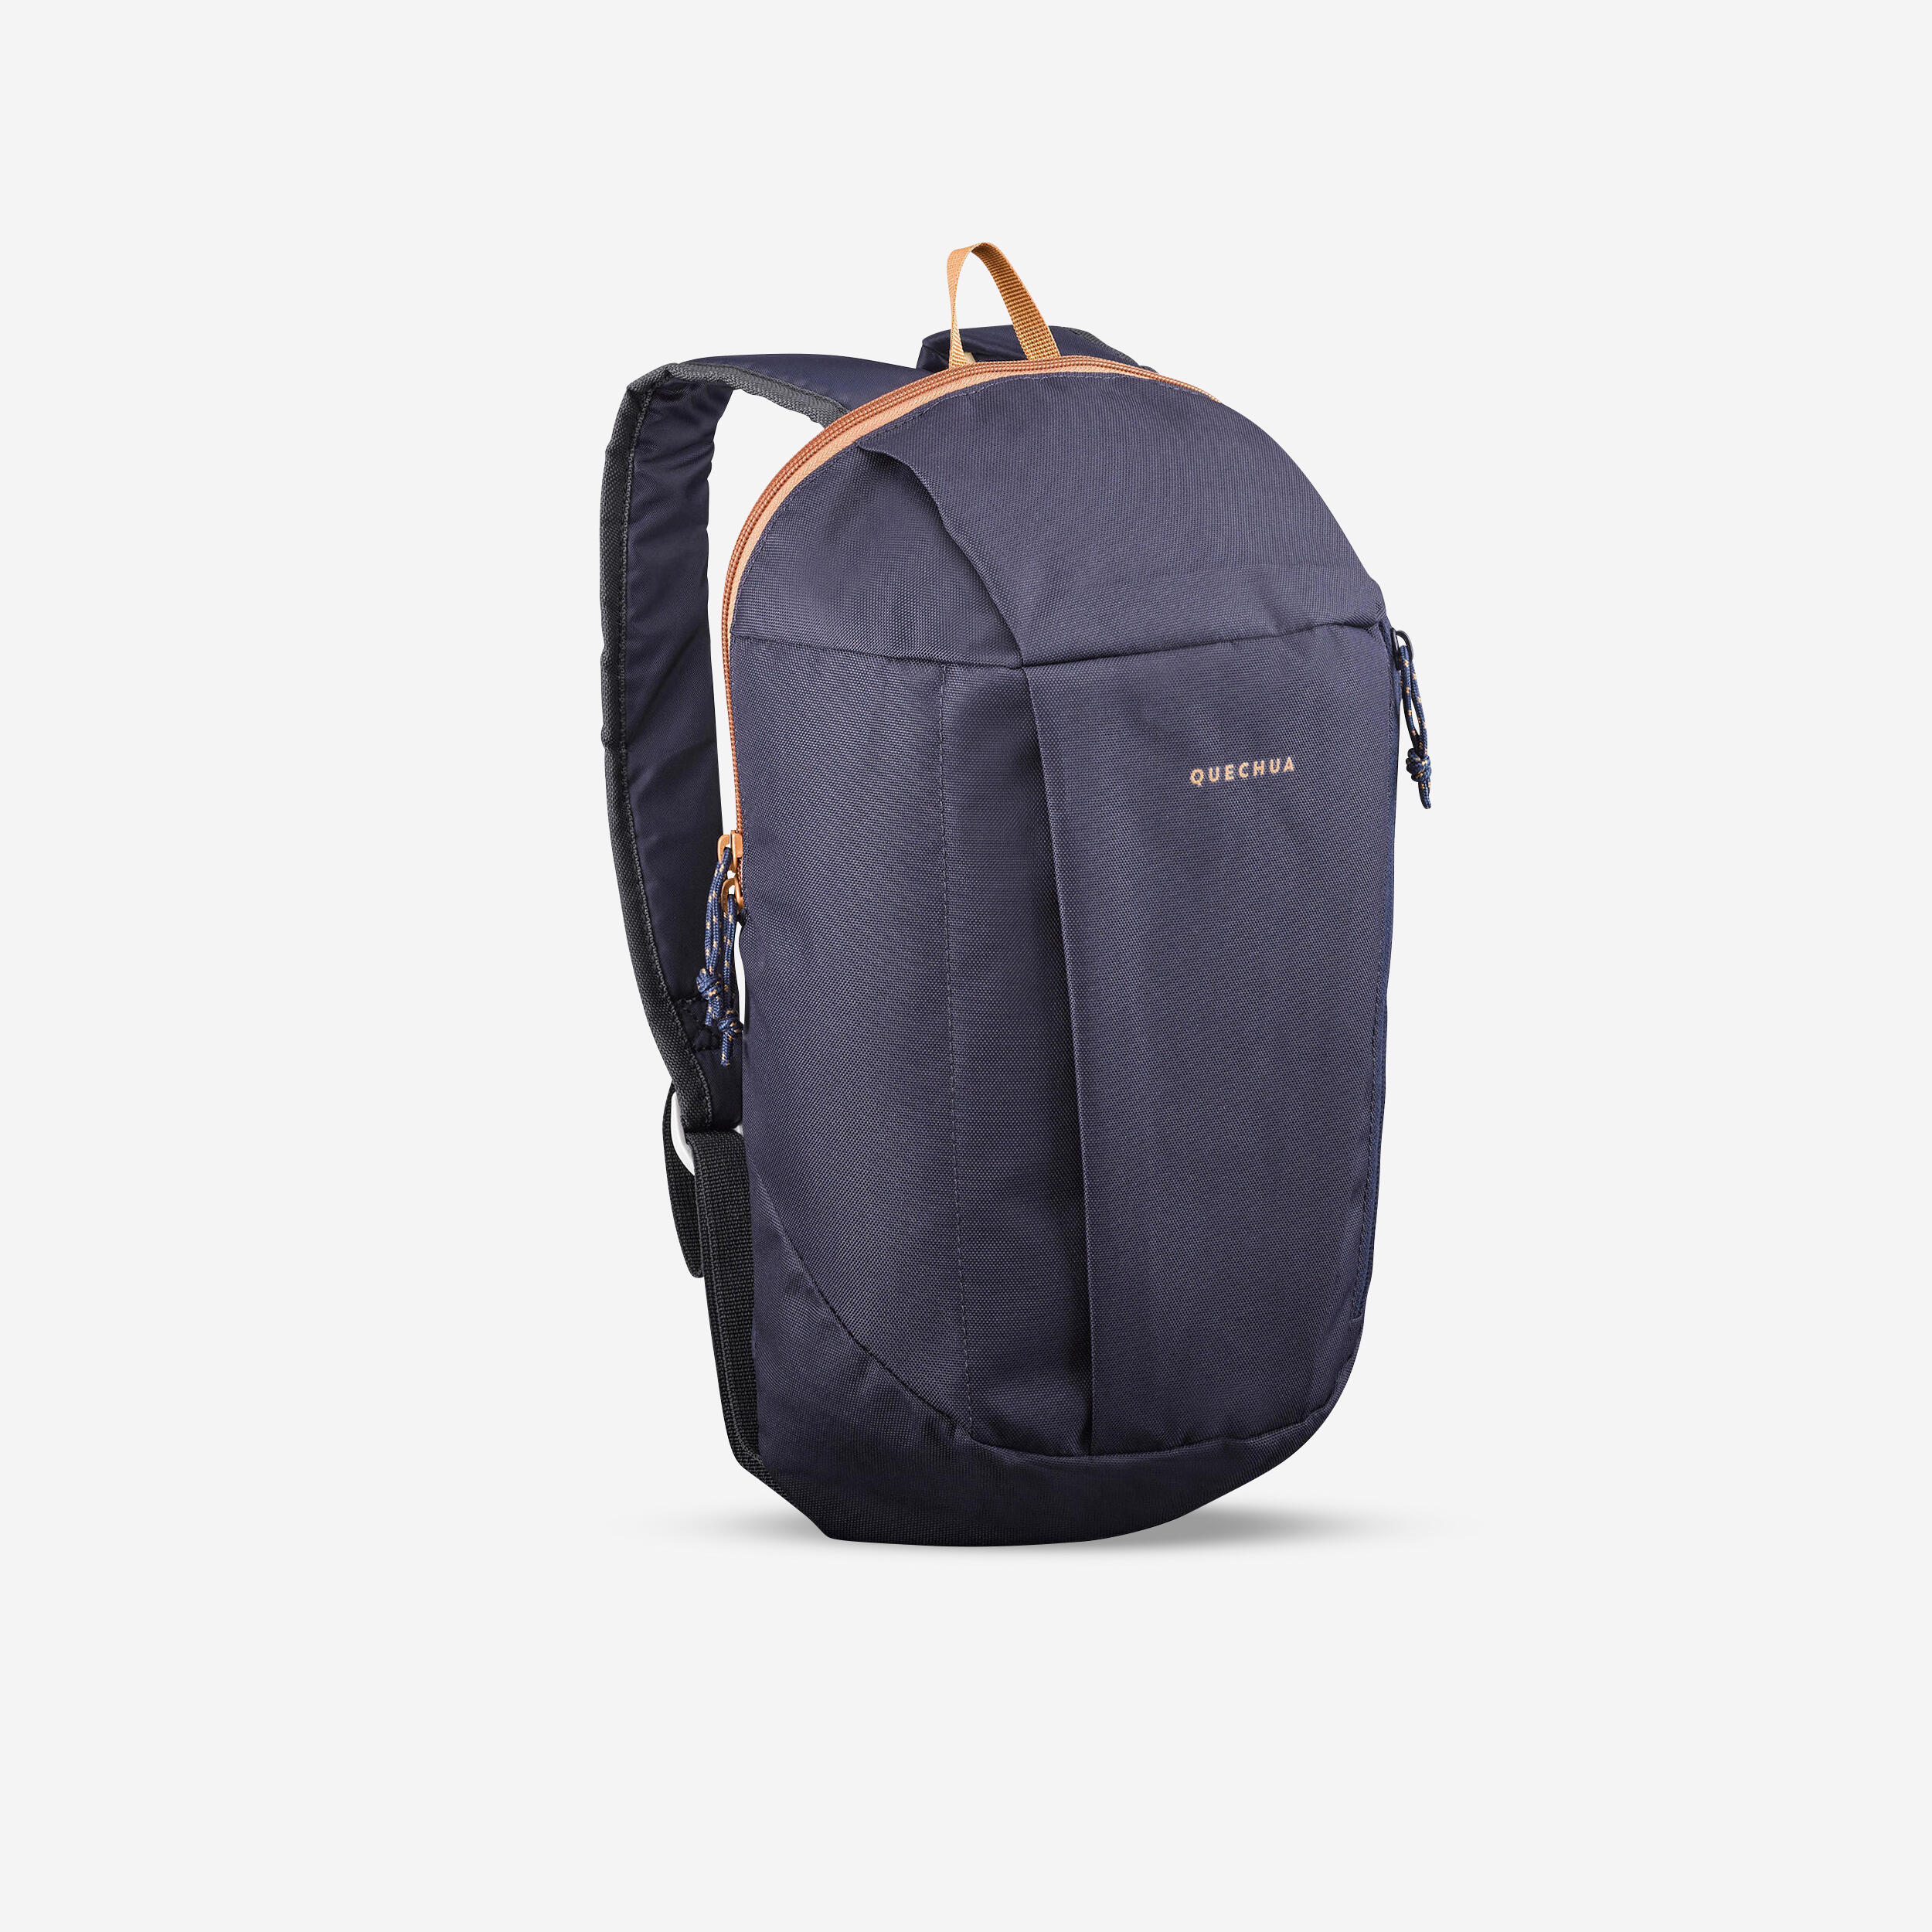 QUECHUA DECATHLON 10 Ltr SMALL Waterproof Backpack(pack of 1,electric blue)  Small Travel Bag - small - Price in India, Reviews, Ratings &  Specifications | Flipkart.com